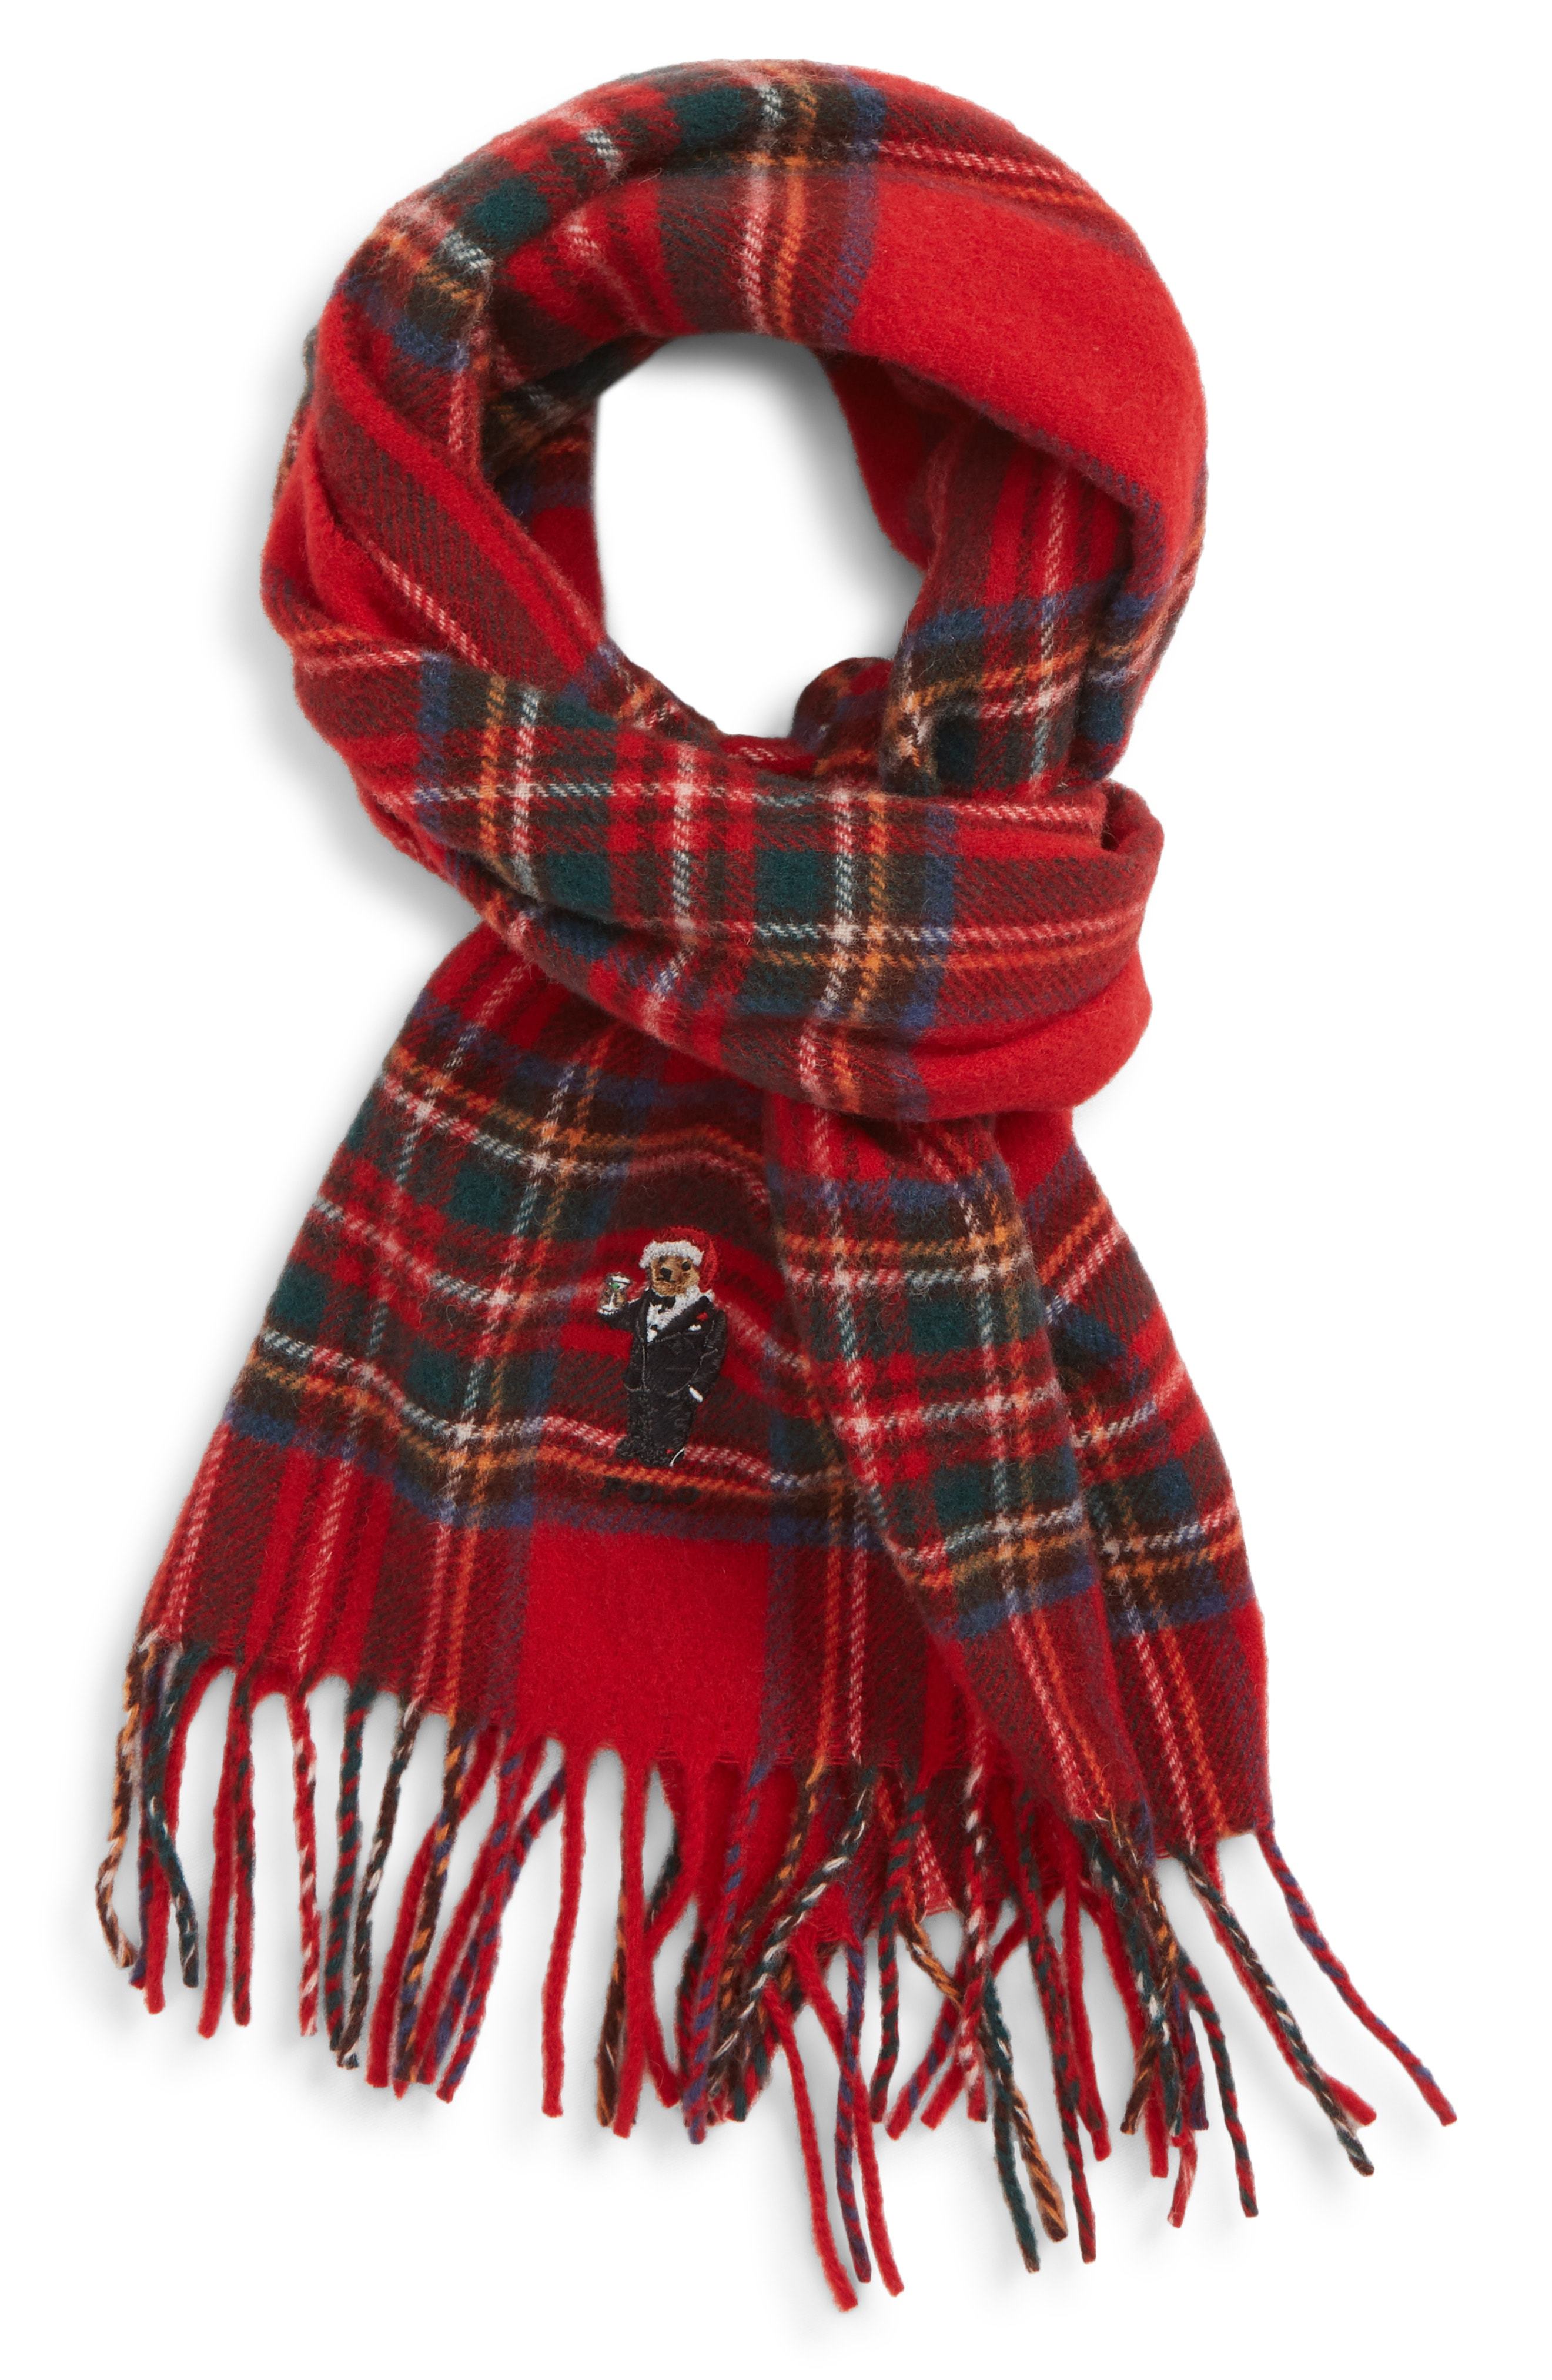 Polo Ralph Lauren Embroidered Bear Plaid Wool Blend Scarf, $68 